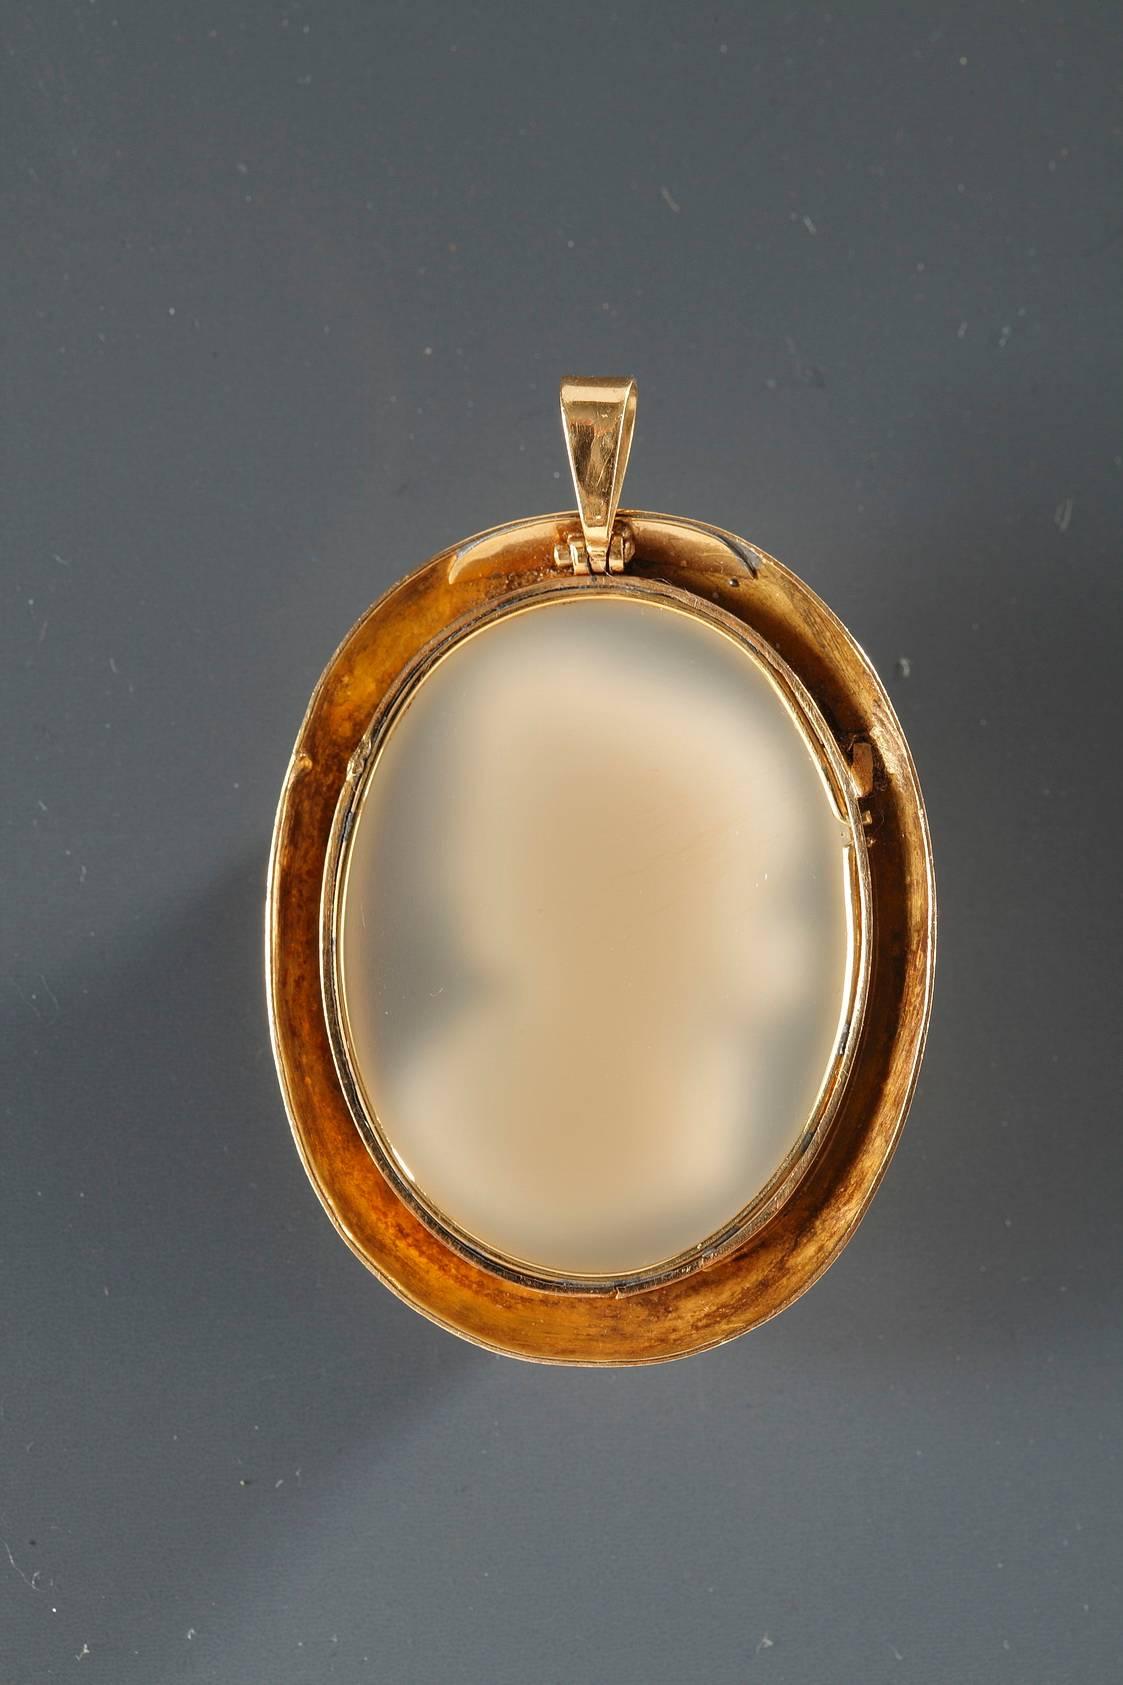 Mid-19th century gold-mounted cameo showing a young female bust. Her hair is set with roses and she is wearing a toga. The mounts are in dark gold. 
French mark tête d’aigle (eagle’s head).
 
Circa :1850

Dim: W: 1,3 in – D: ,4in – H: